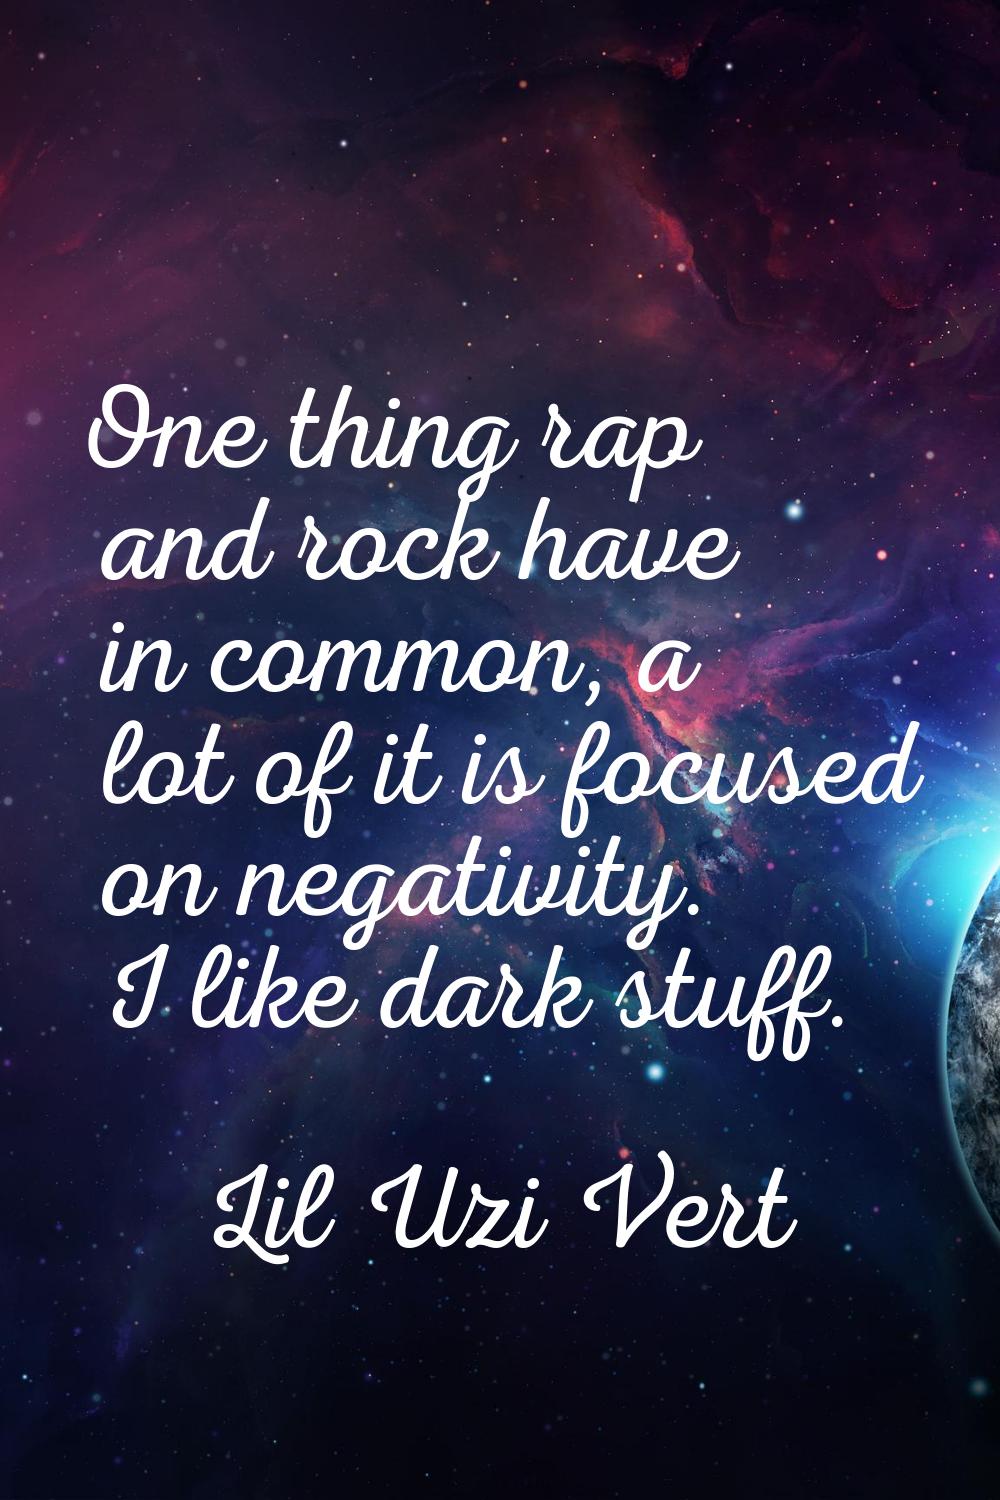 One thing rap and rock have in common, a lot of it is focused on negativity. I like dark stuff.